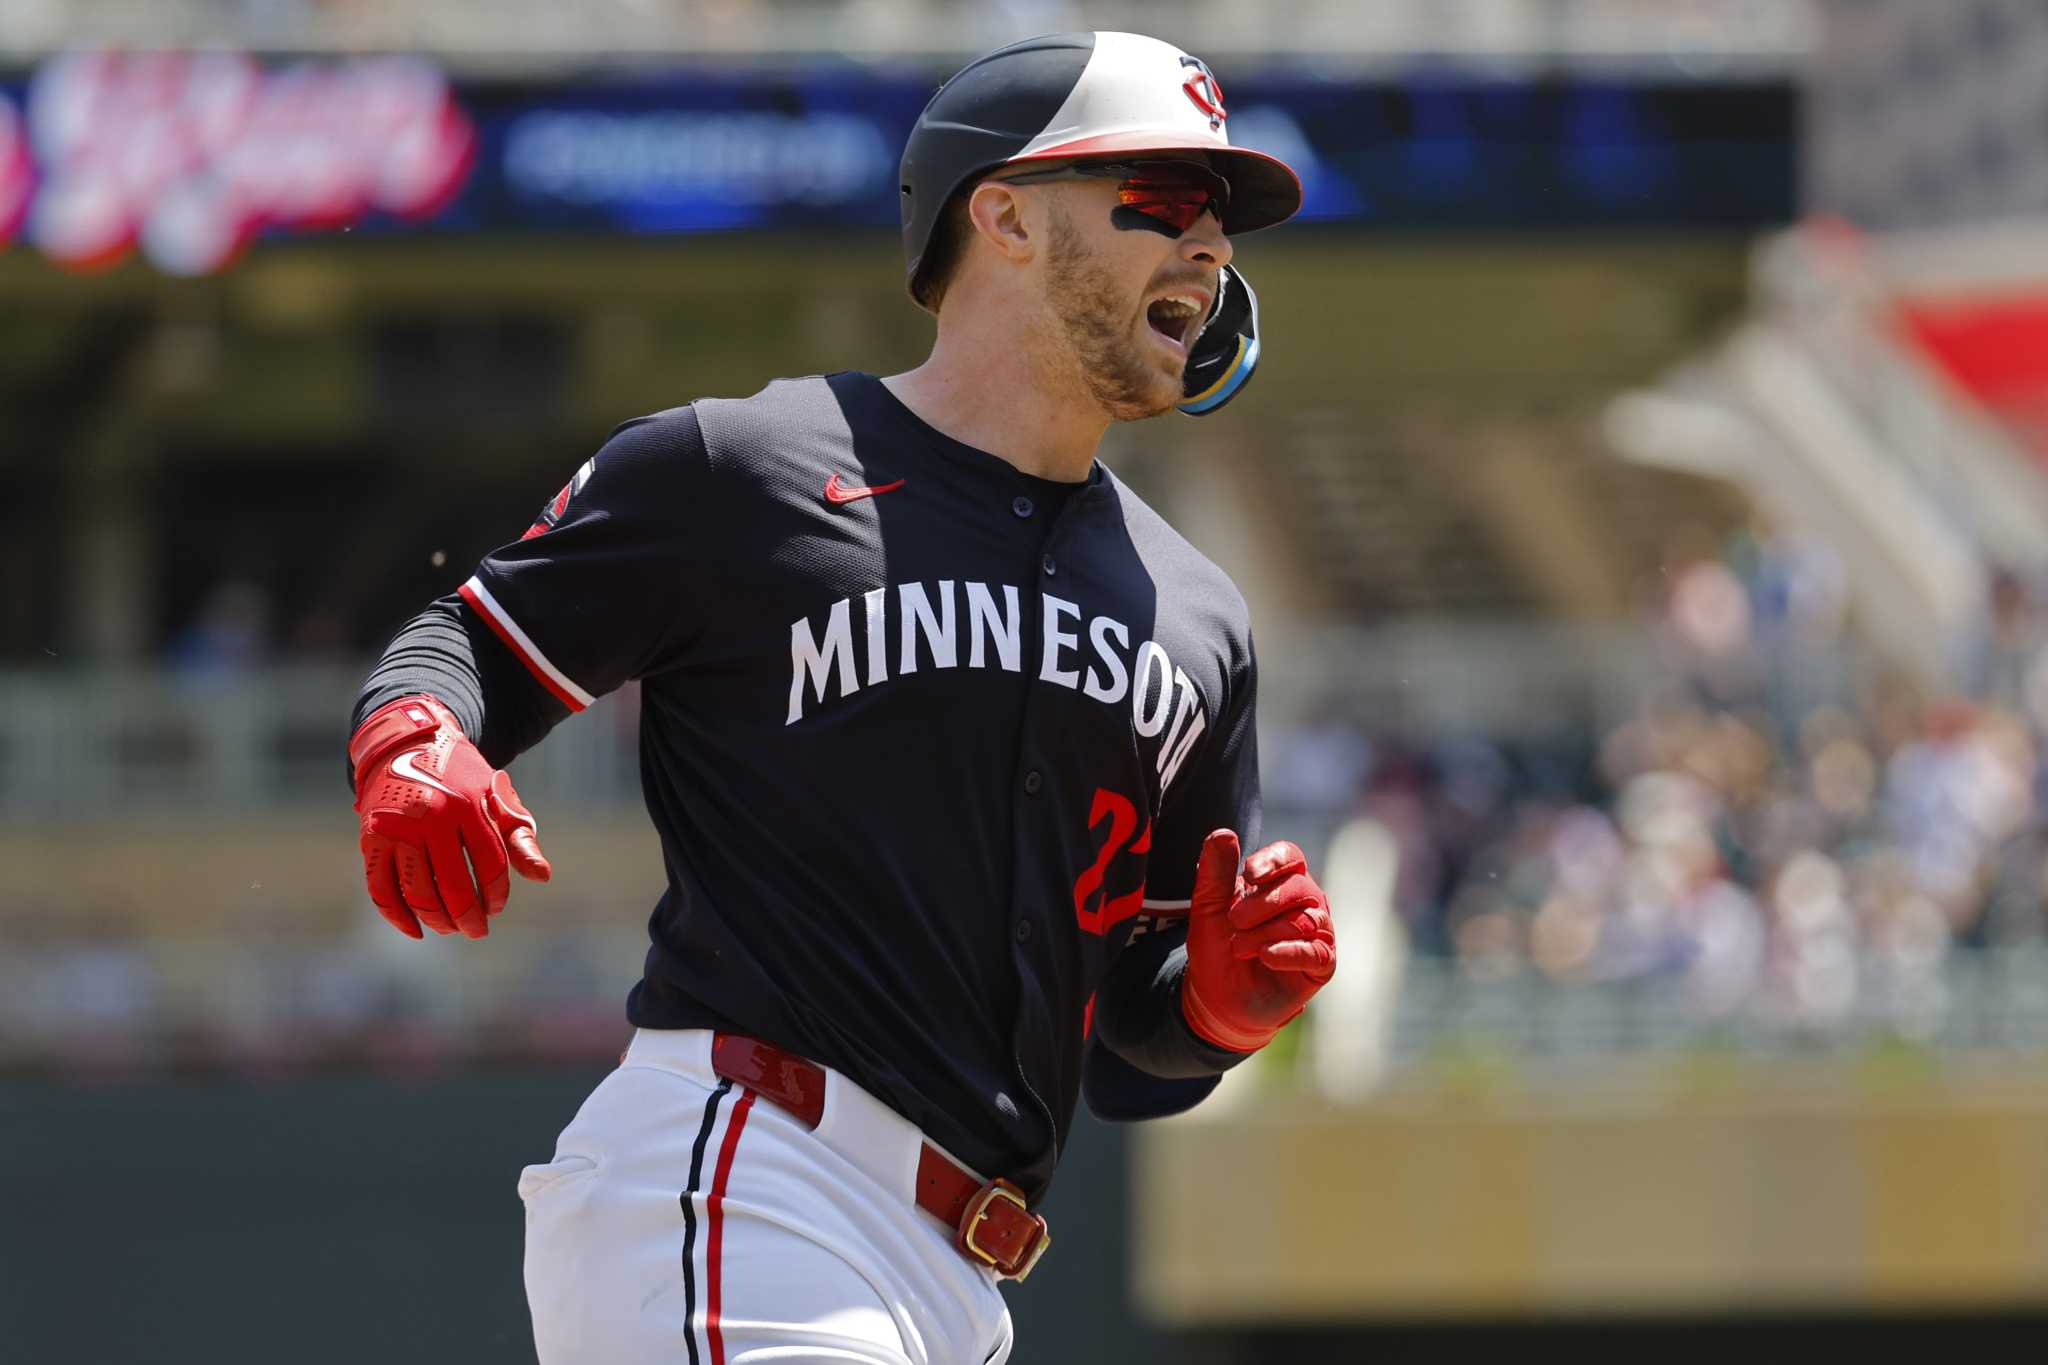 Ryan Jeffers homers twice as Twins rally for 7-6 victory over Royals